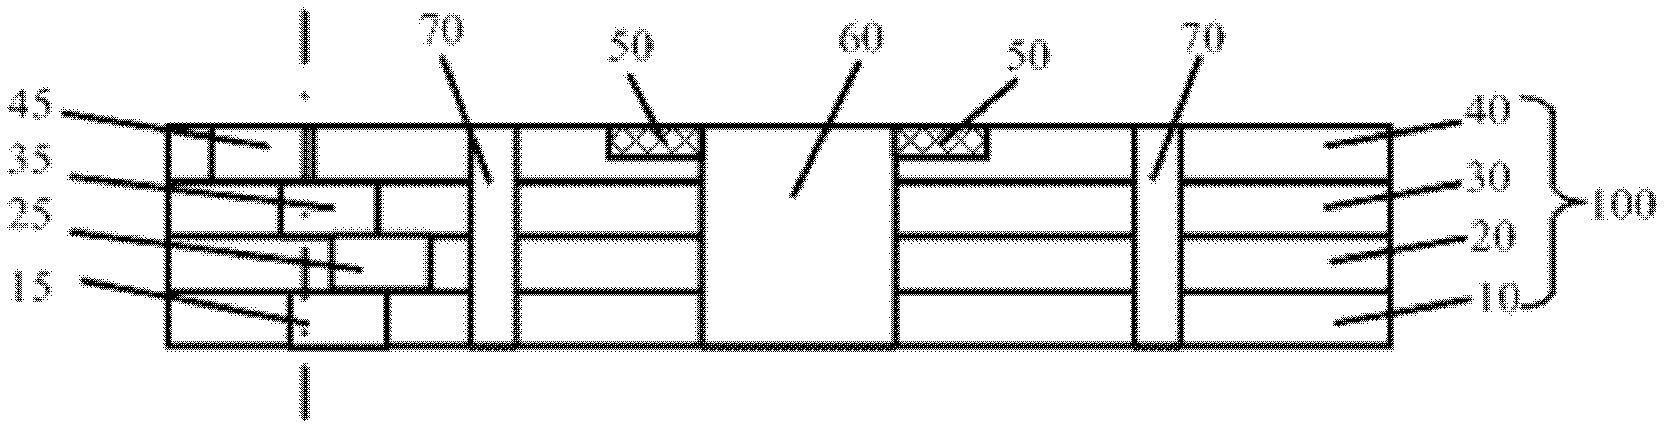 Package method for printed circuit board (PCB) substrate